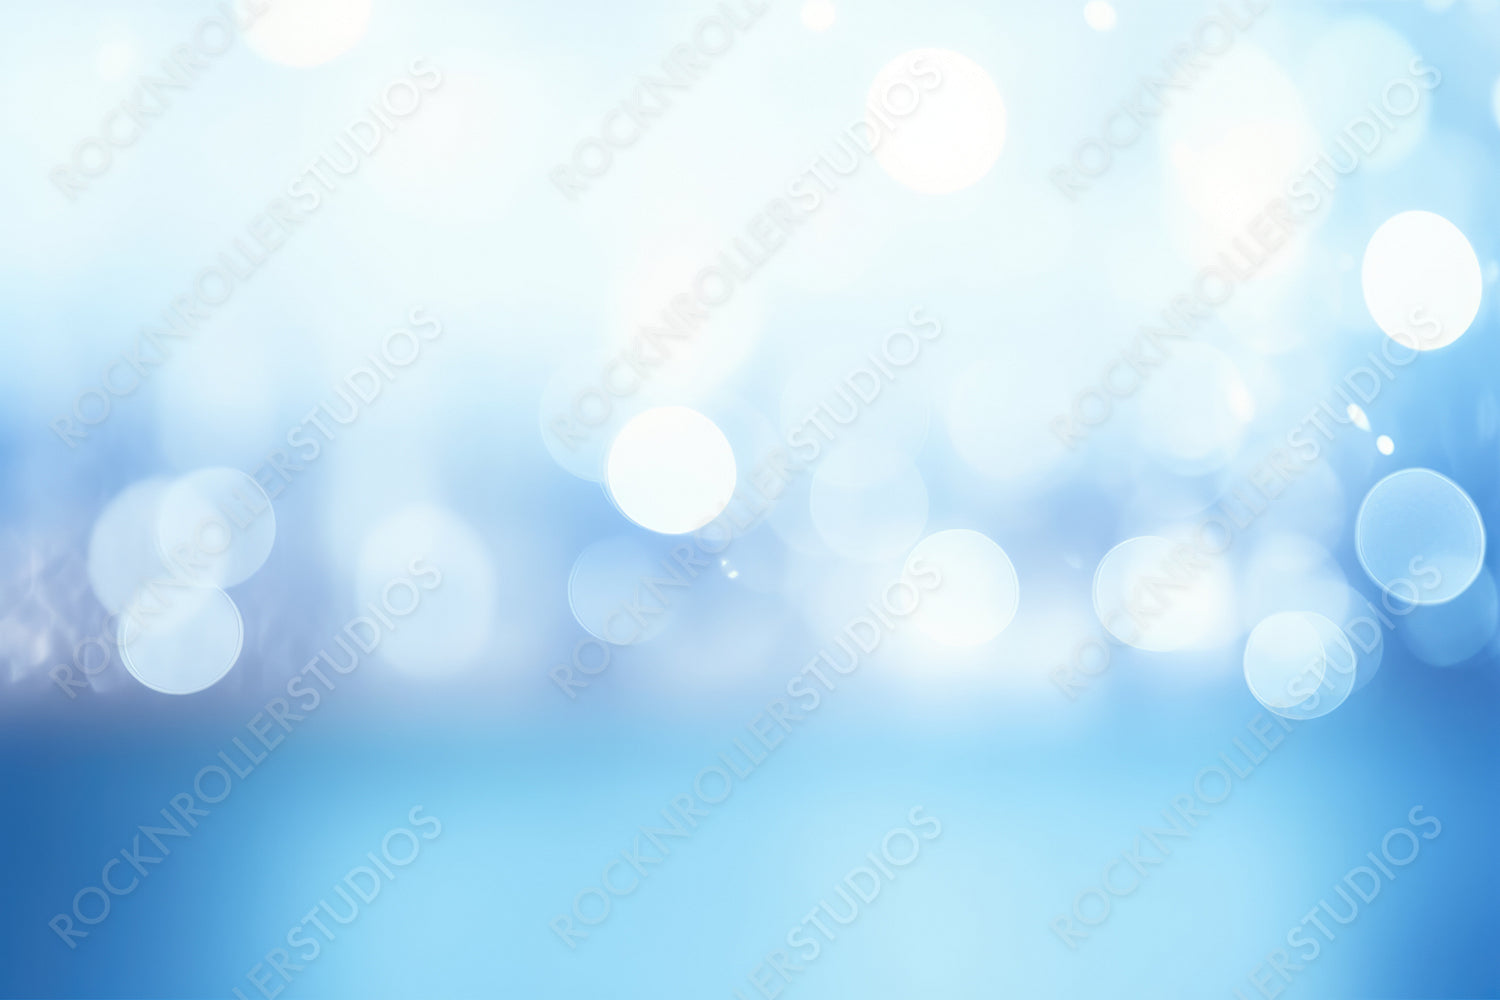 Abstract light blue blurred background for presentation with beautiful round bokeh.